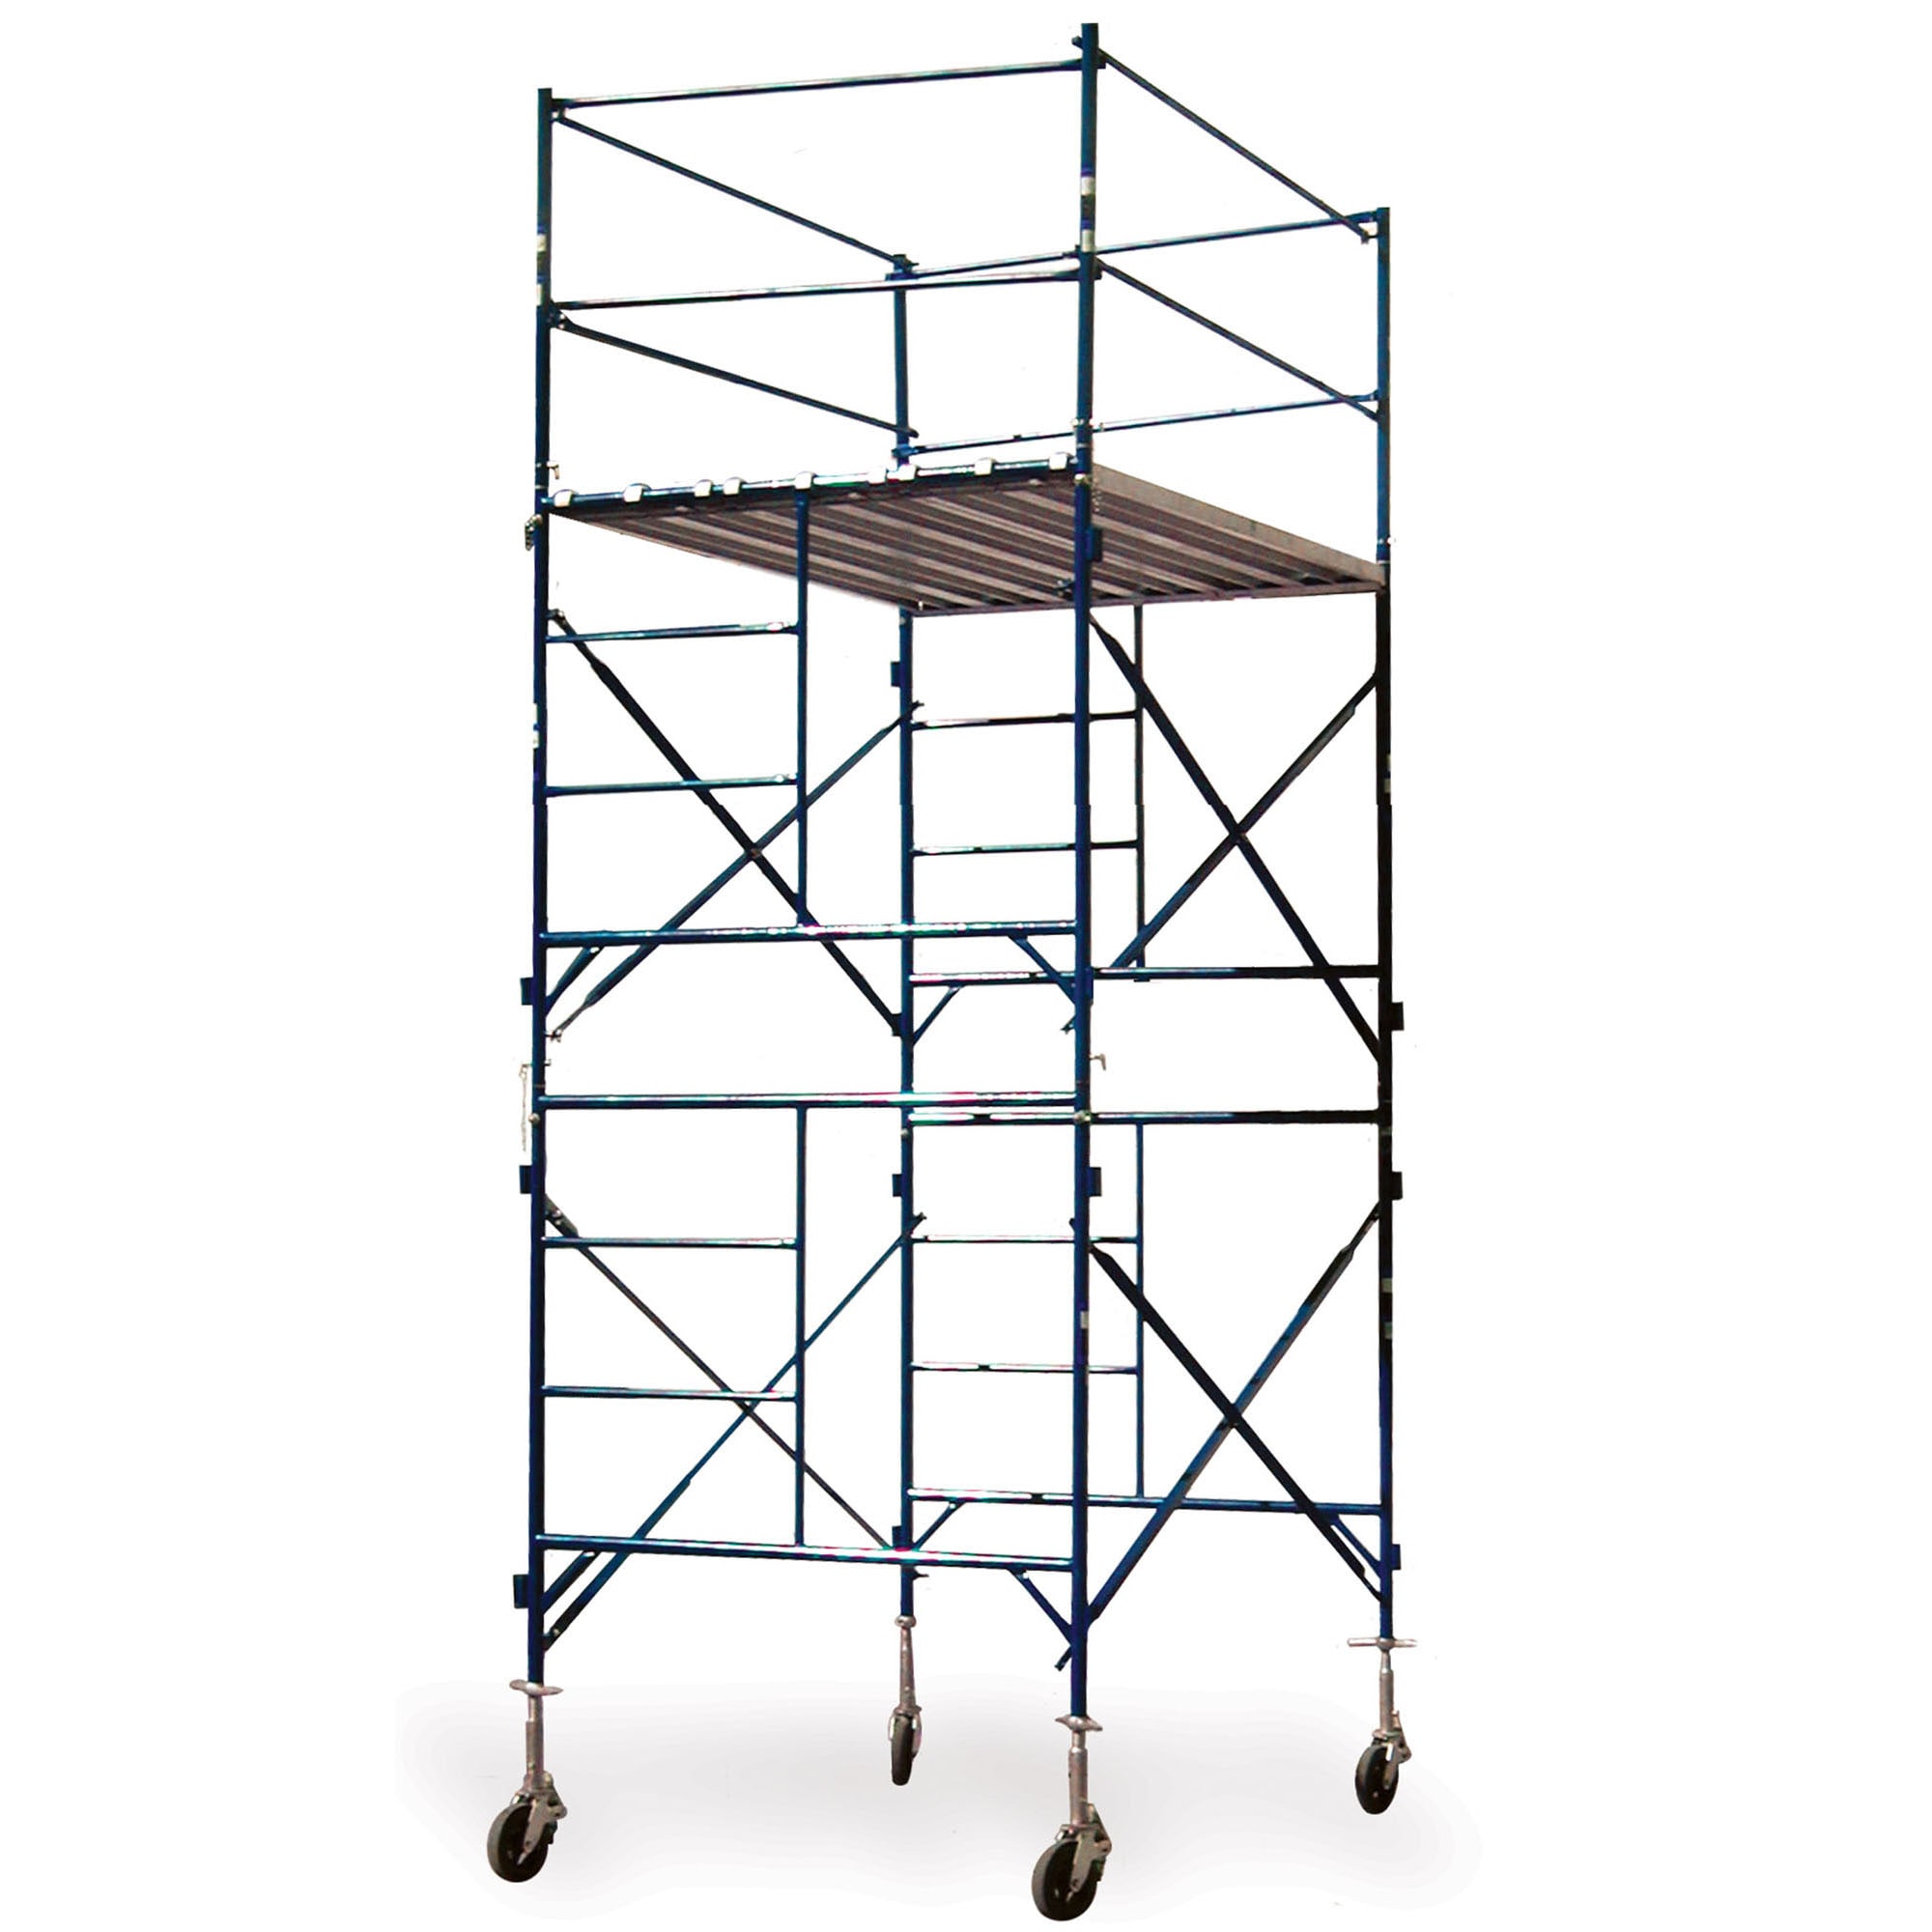 Rolling 2 story Scaffold Tower (Blue paint finishSize 10 foot base for outdoor useFor use at any residential or commercial construction siteDimensions 16 feet high x 7 feet wide x 5 feet deepExceeds all OSHA and ANSI scaffolding regulationsModel 07098A